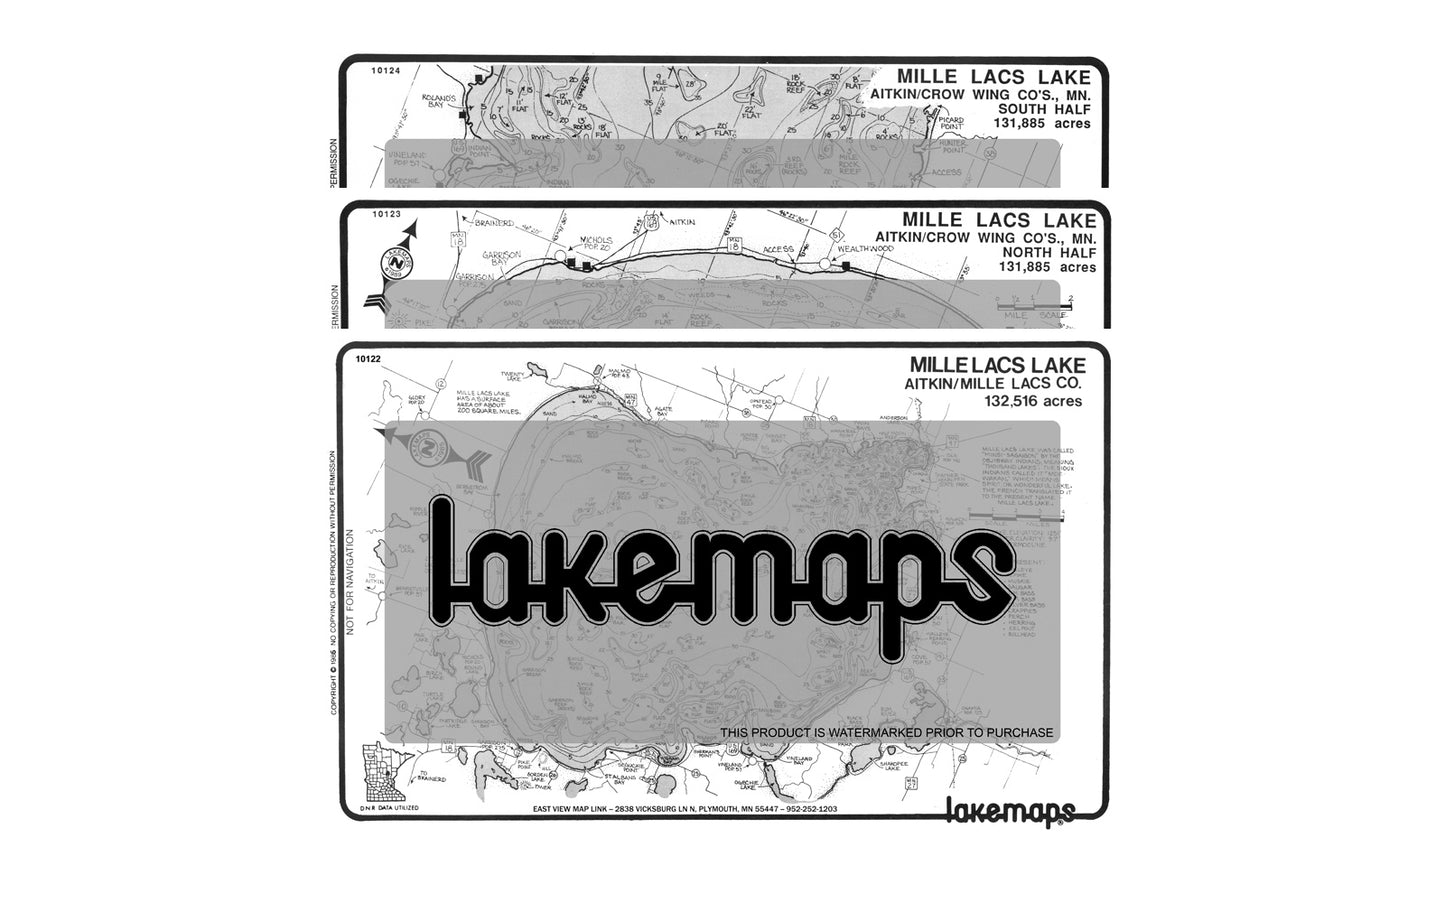 Aitkin County, MN - MILLE LACS - MAP PACK -Lakemap - 10113